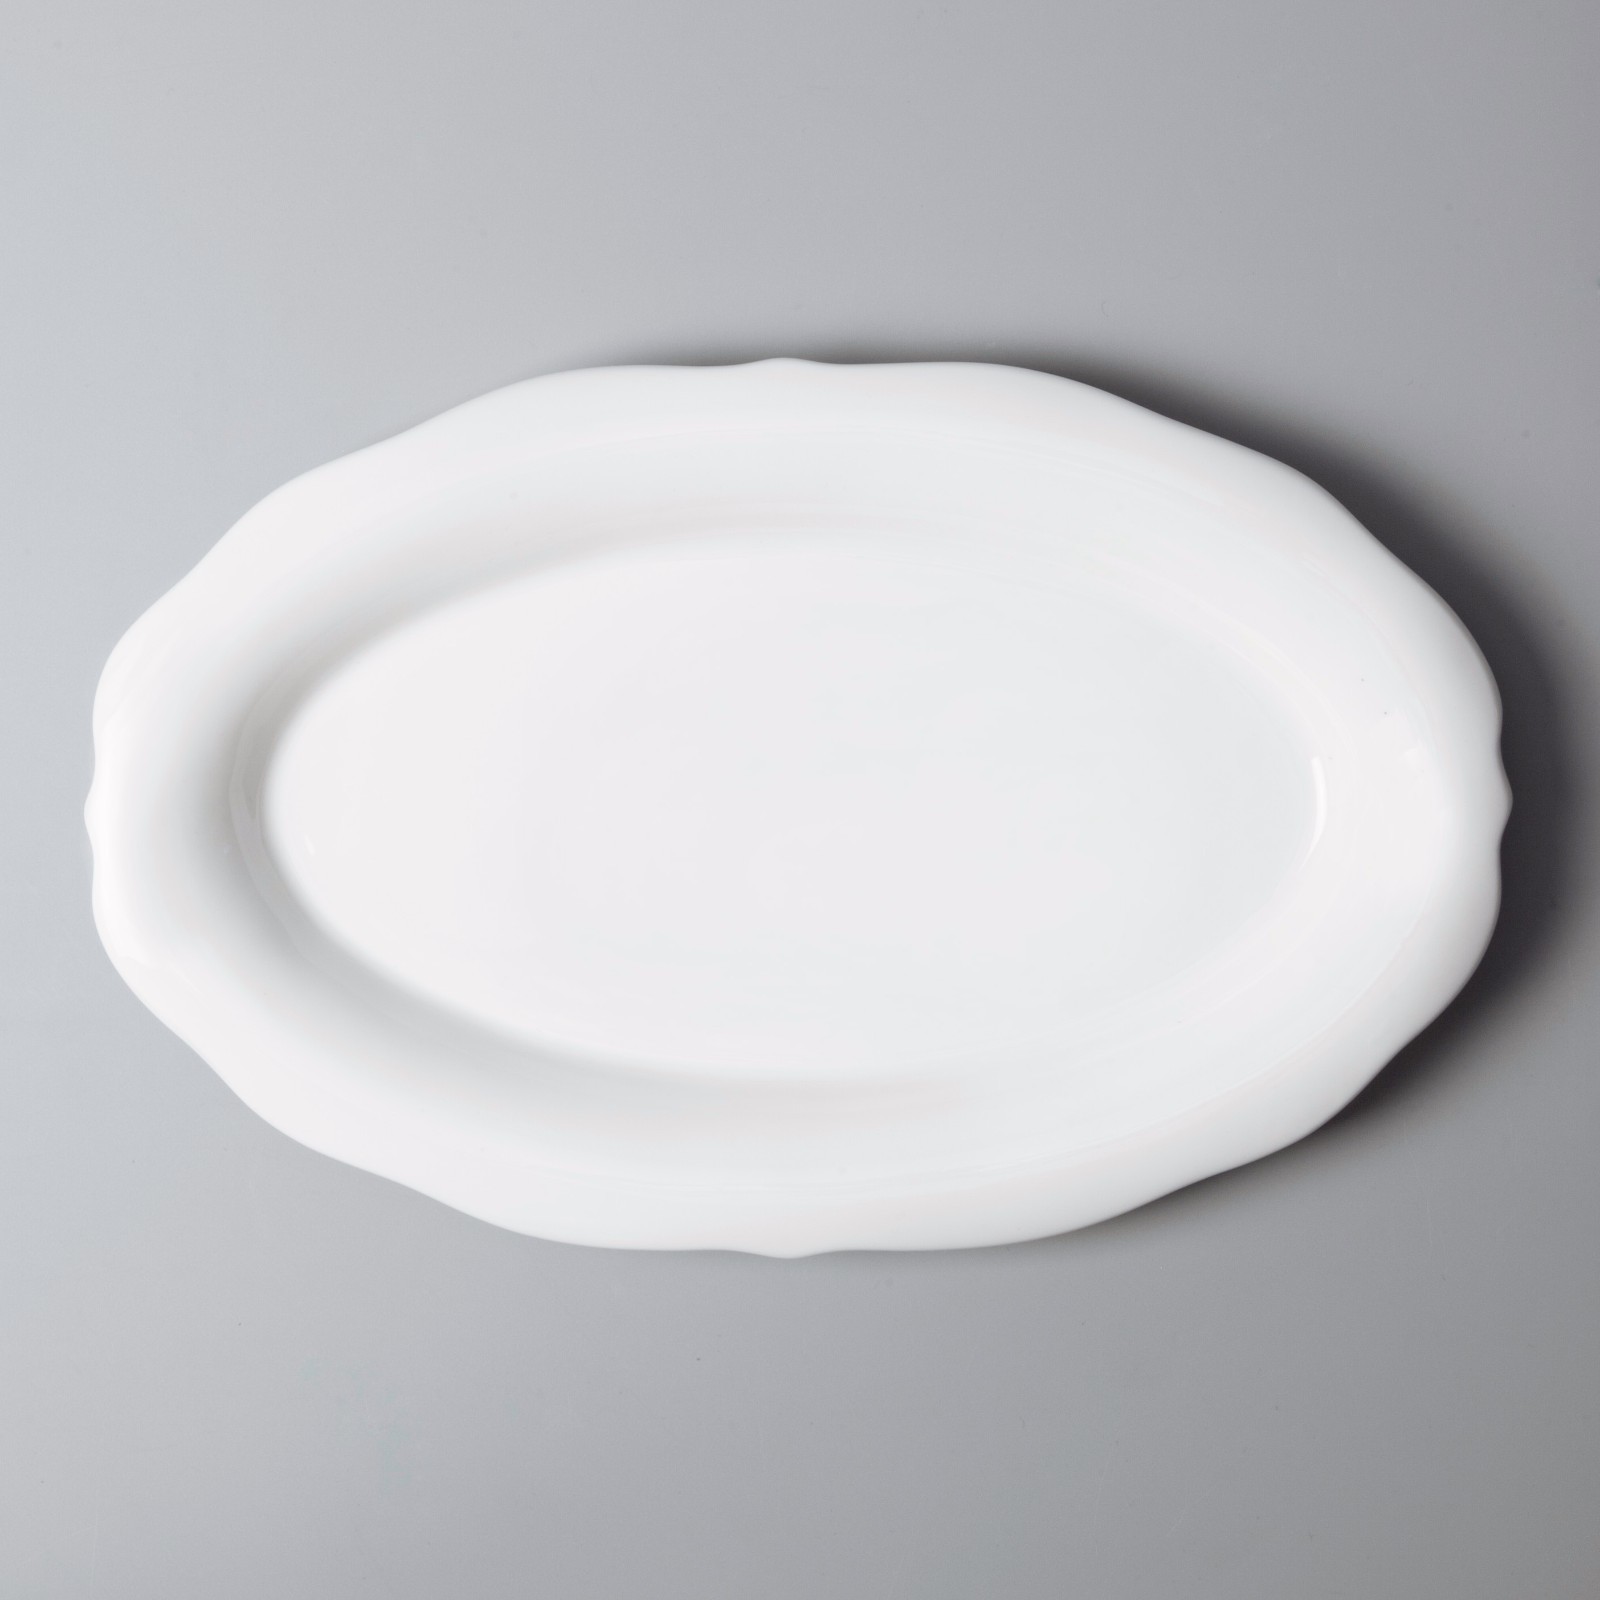 Two Eight Brand french smooth glaze white porcelain tableware dish